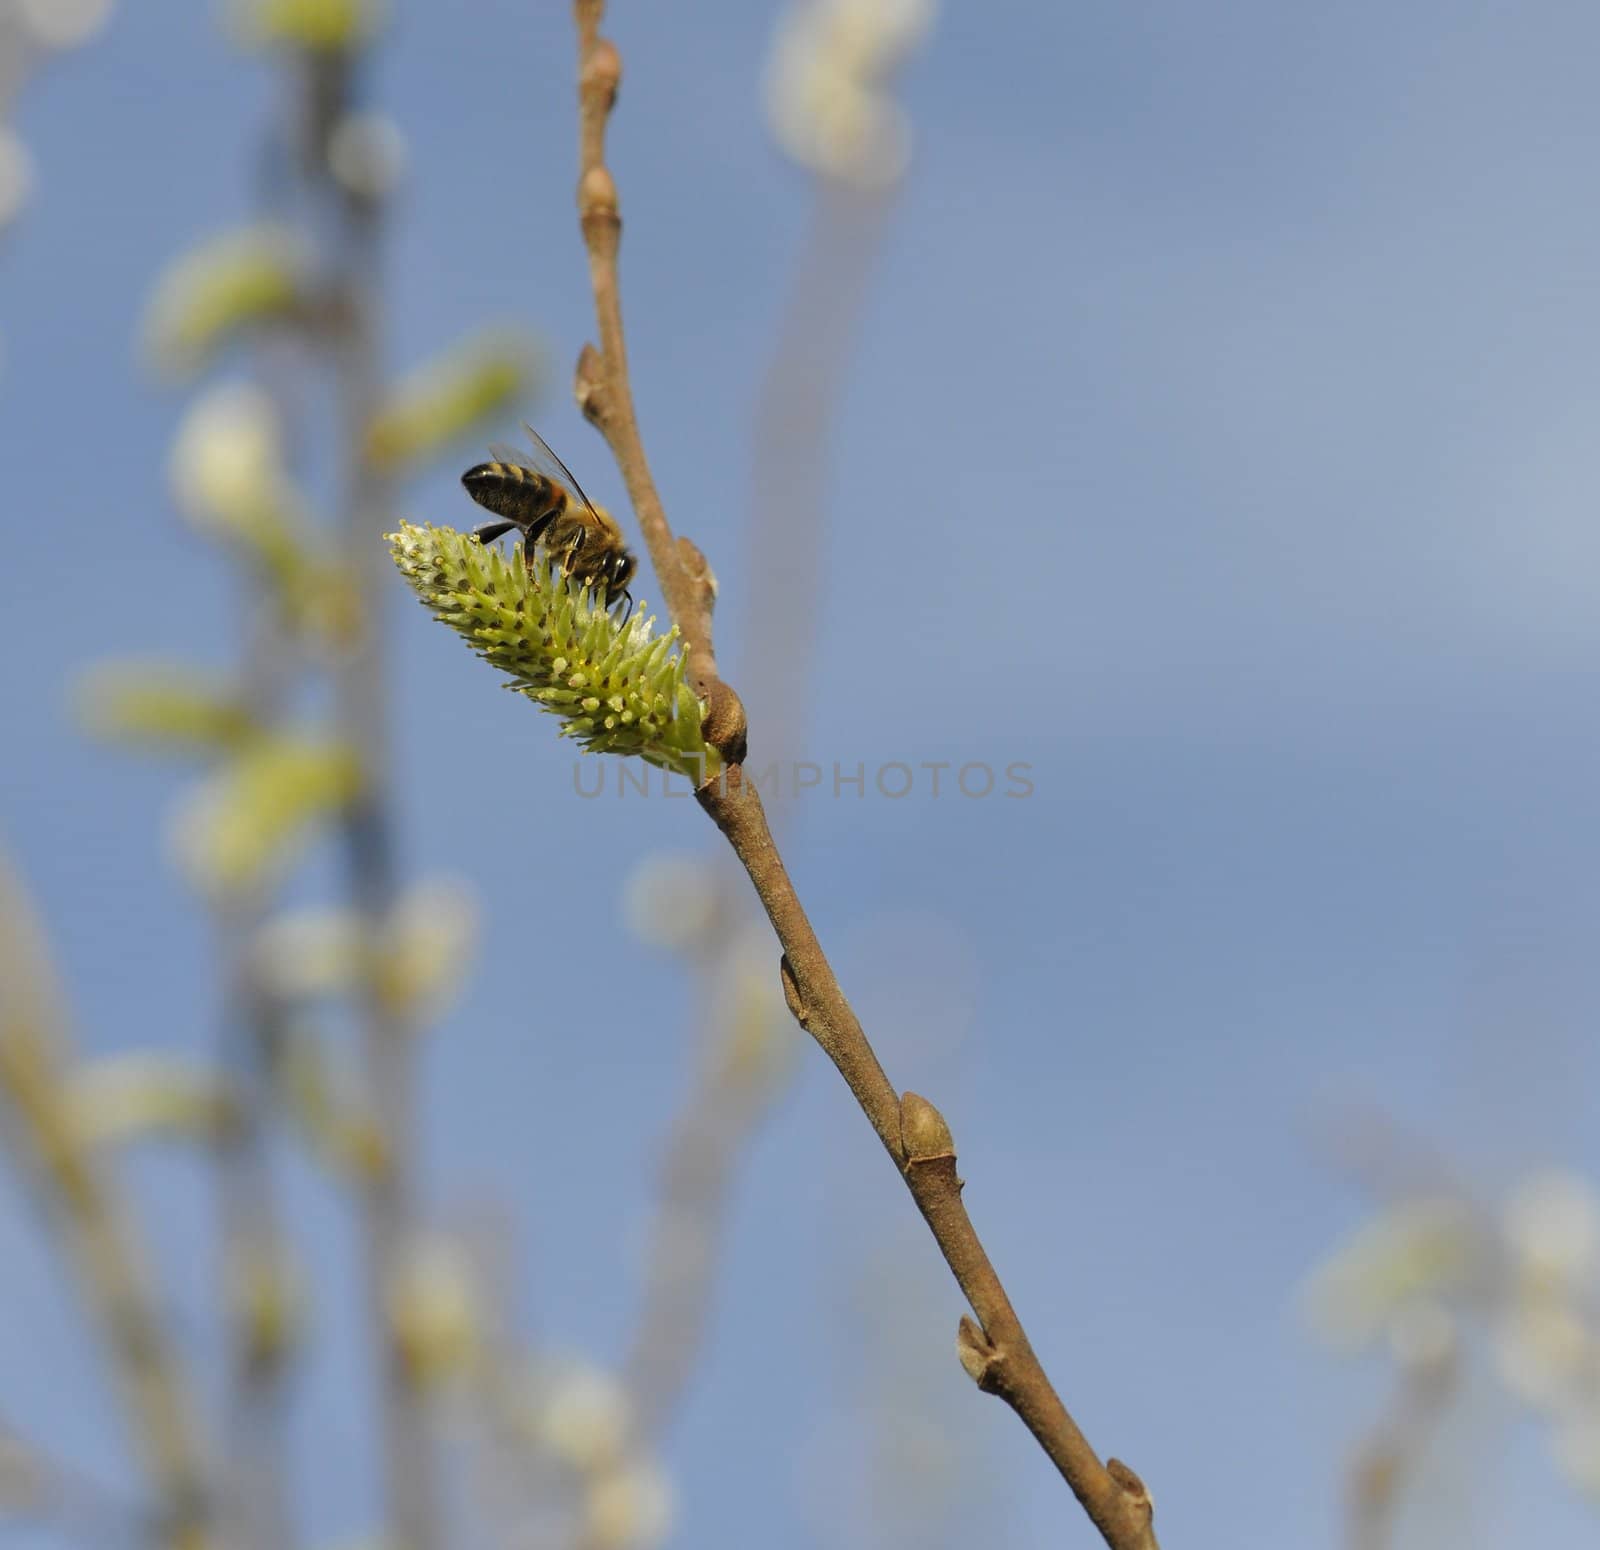 A bee above a green bud by shkyo30